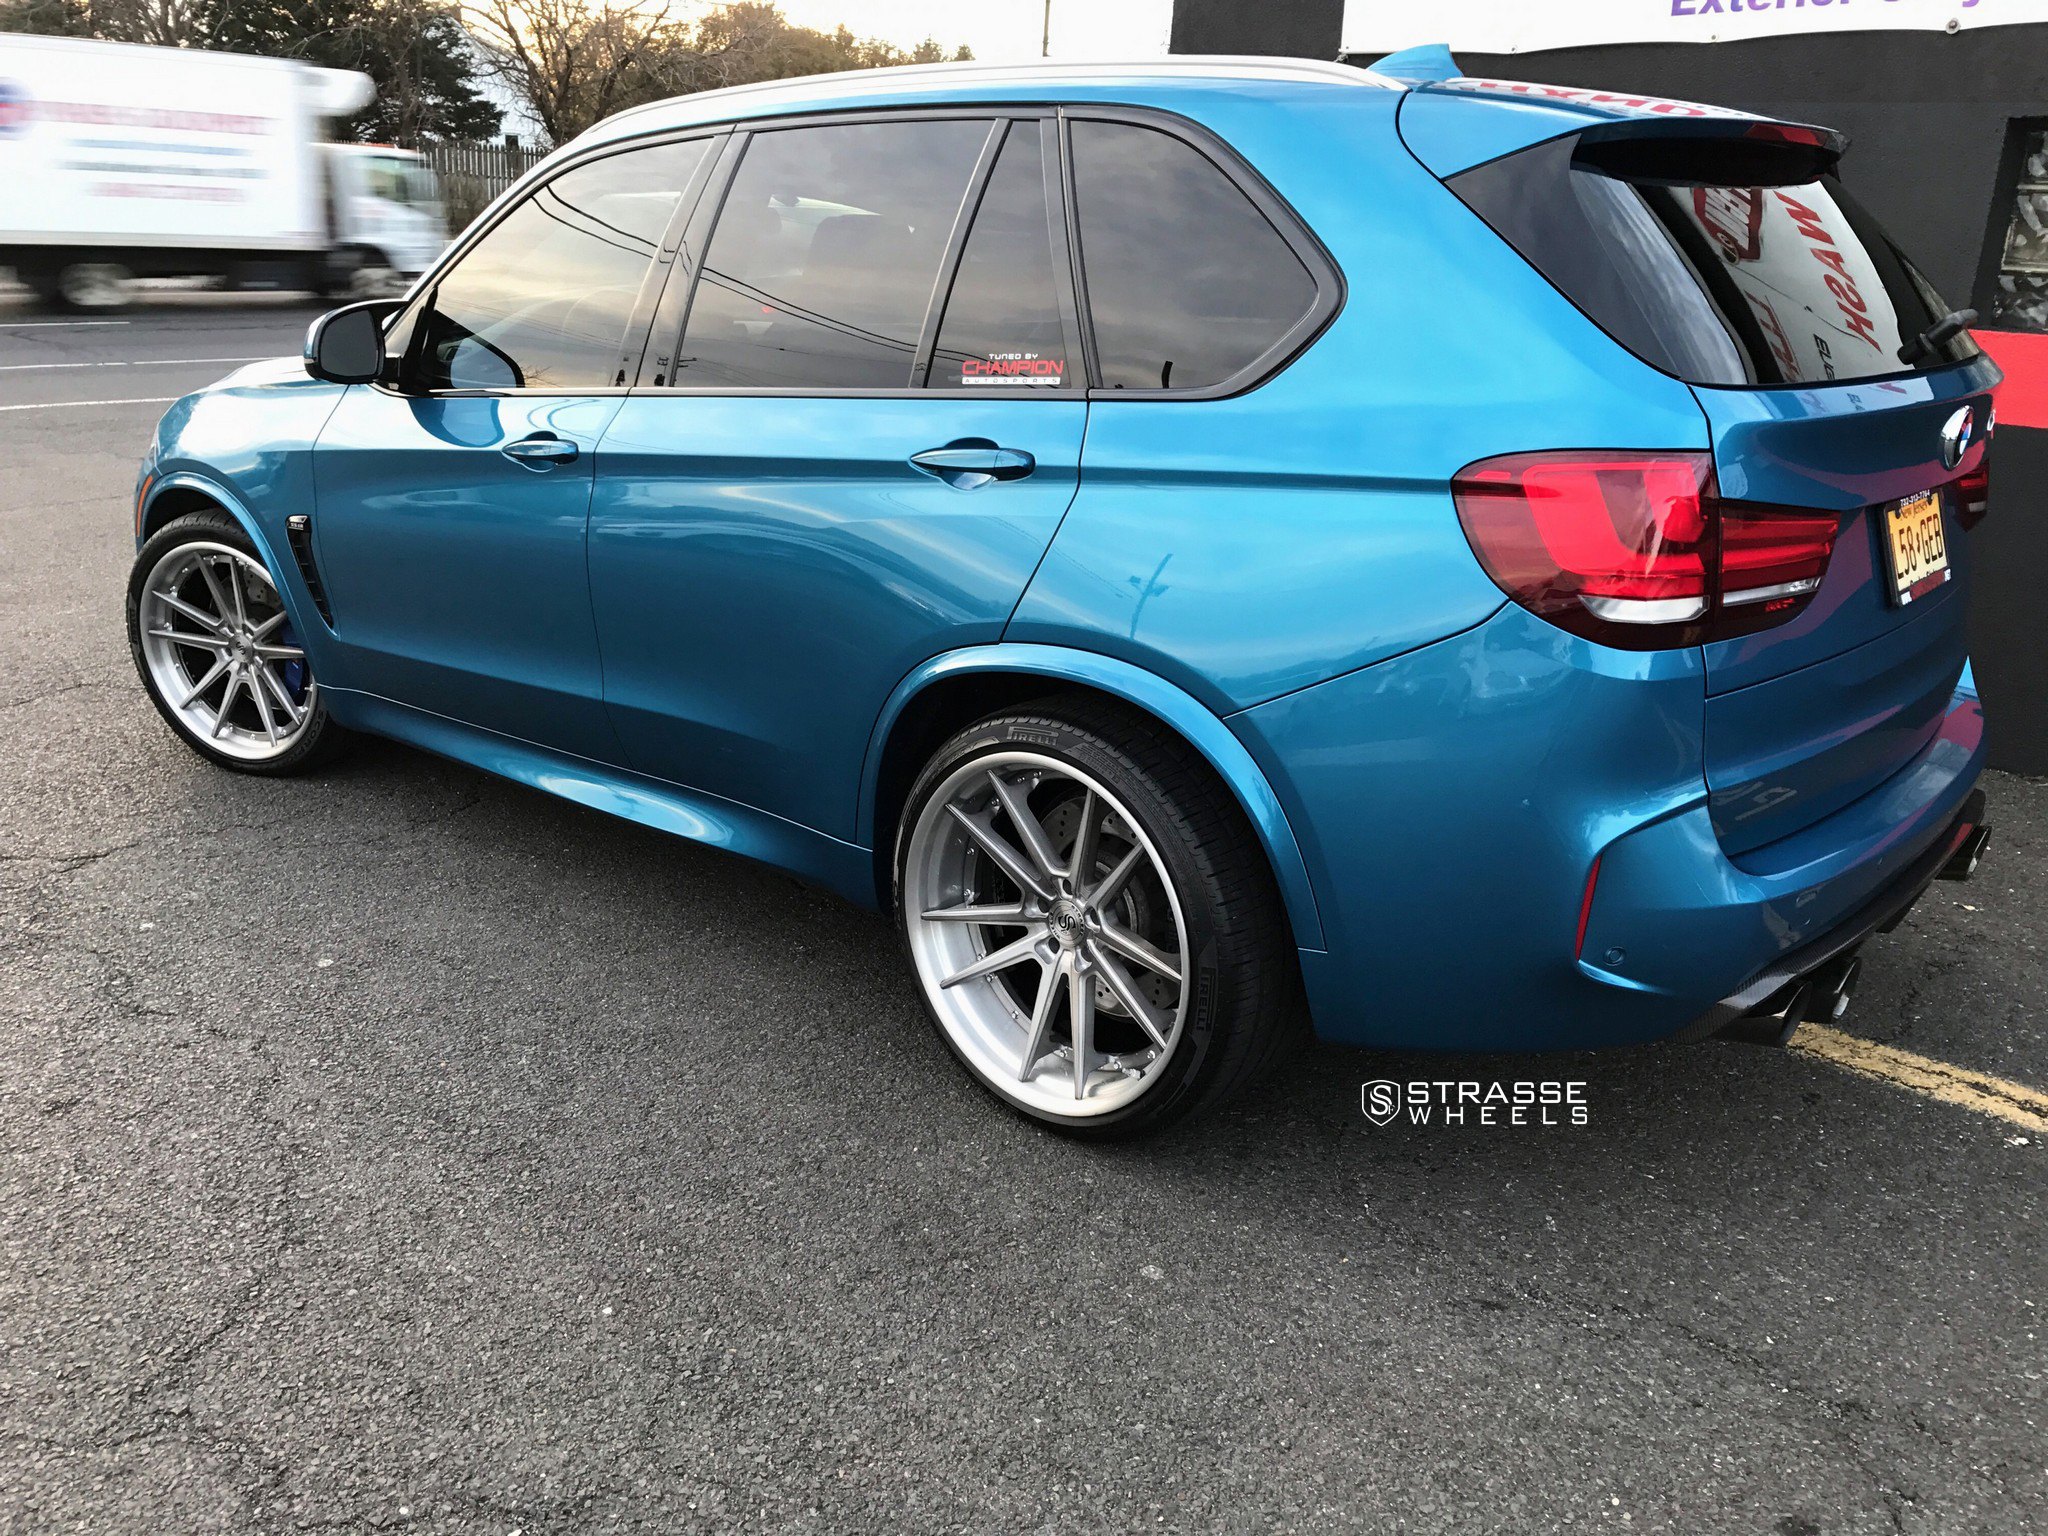 Roofline Spoiler with Light on Blue BMW X5 - Photo by Strasse Forged